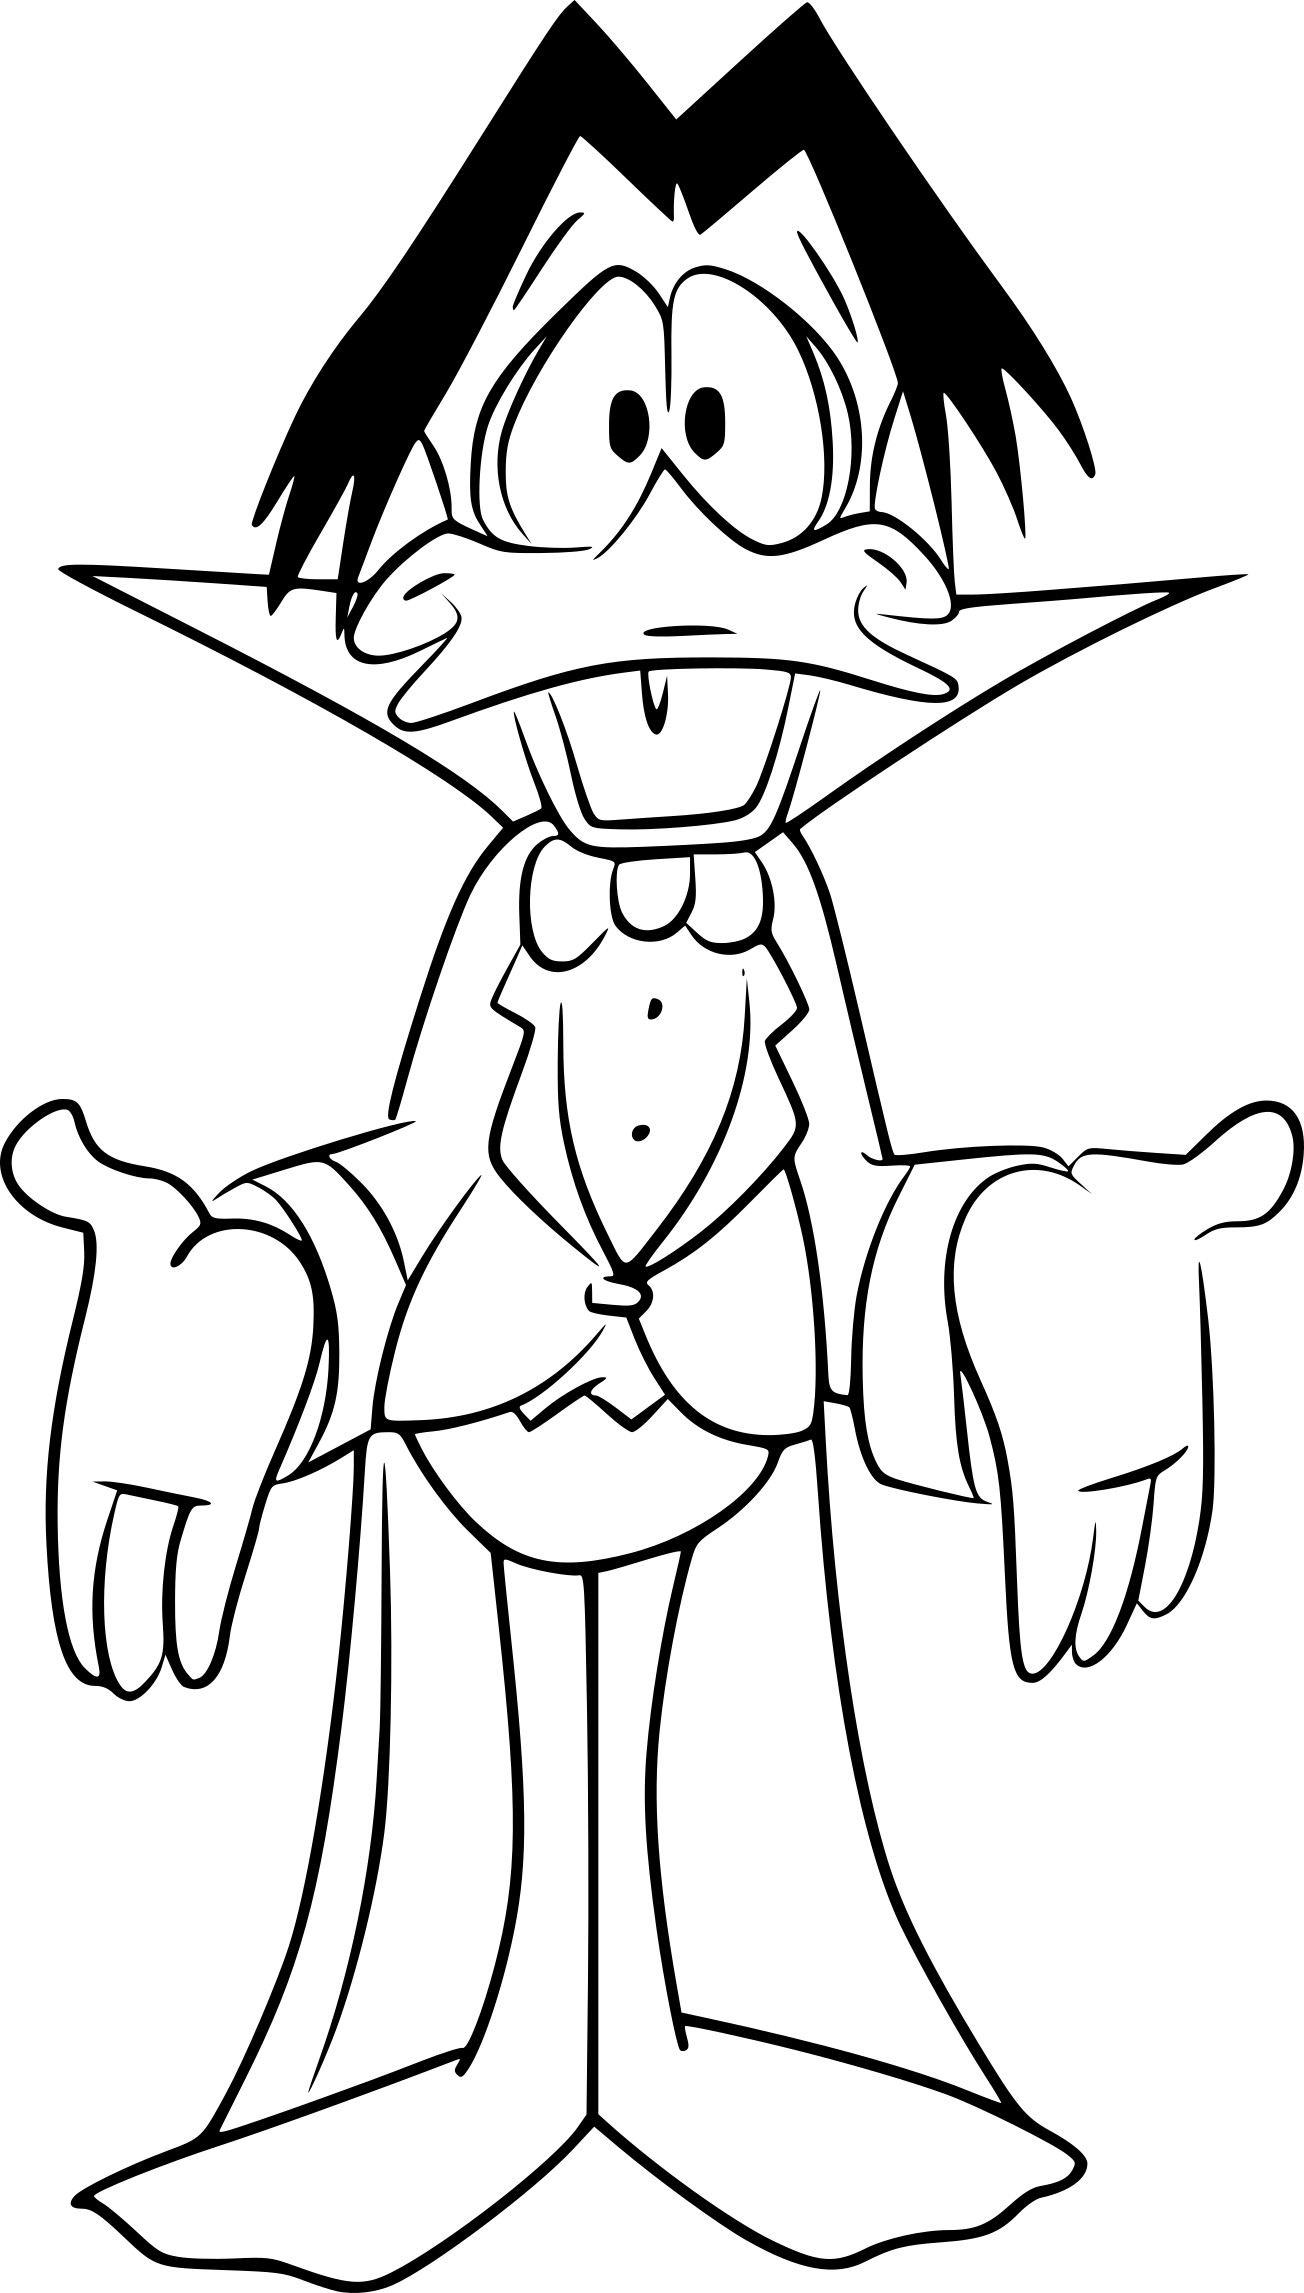 Count Mordicus coloring page